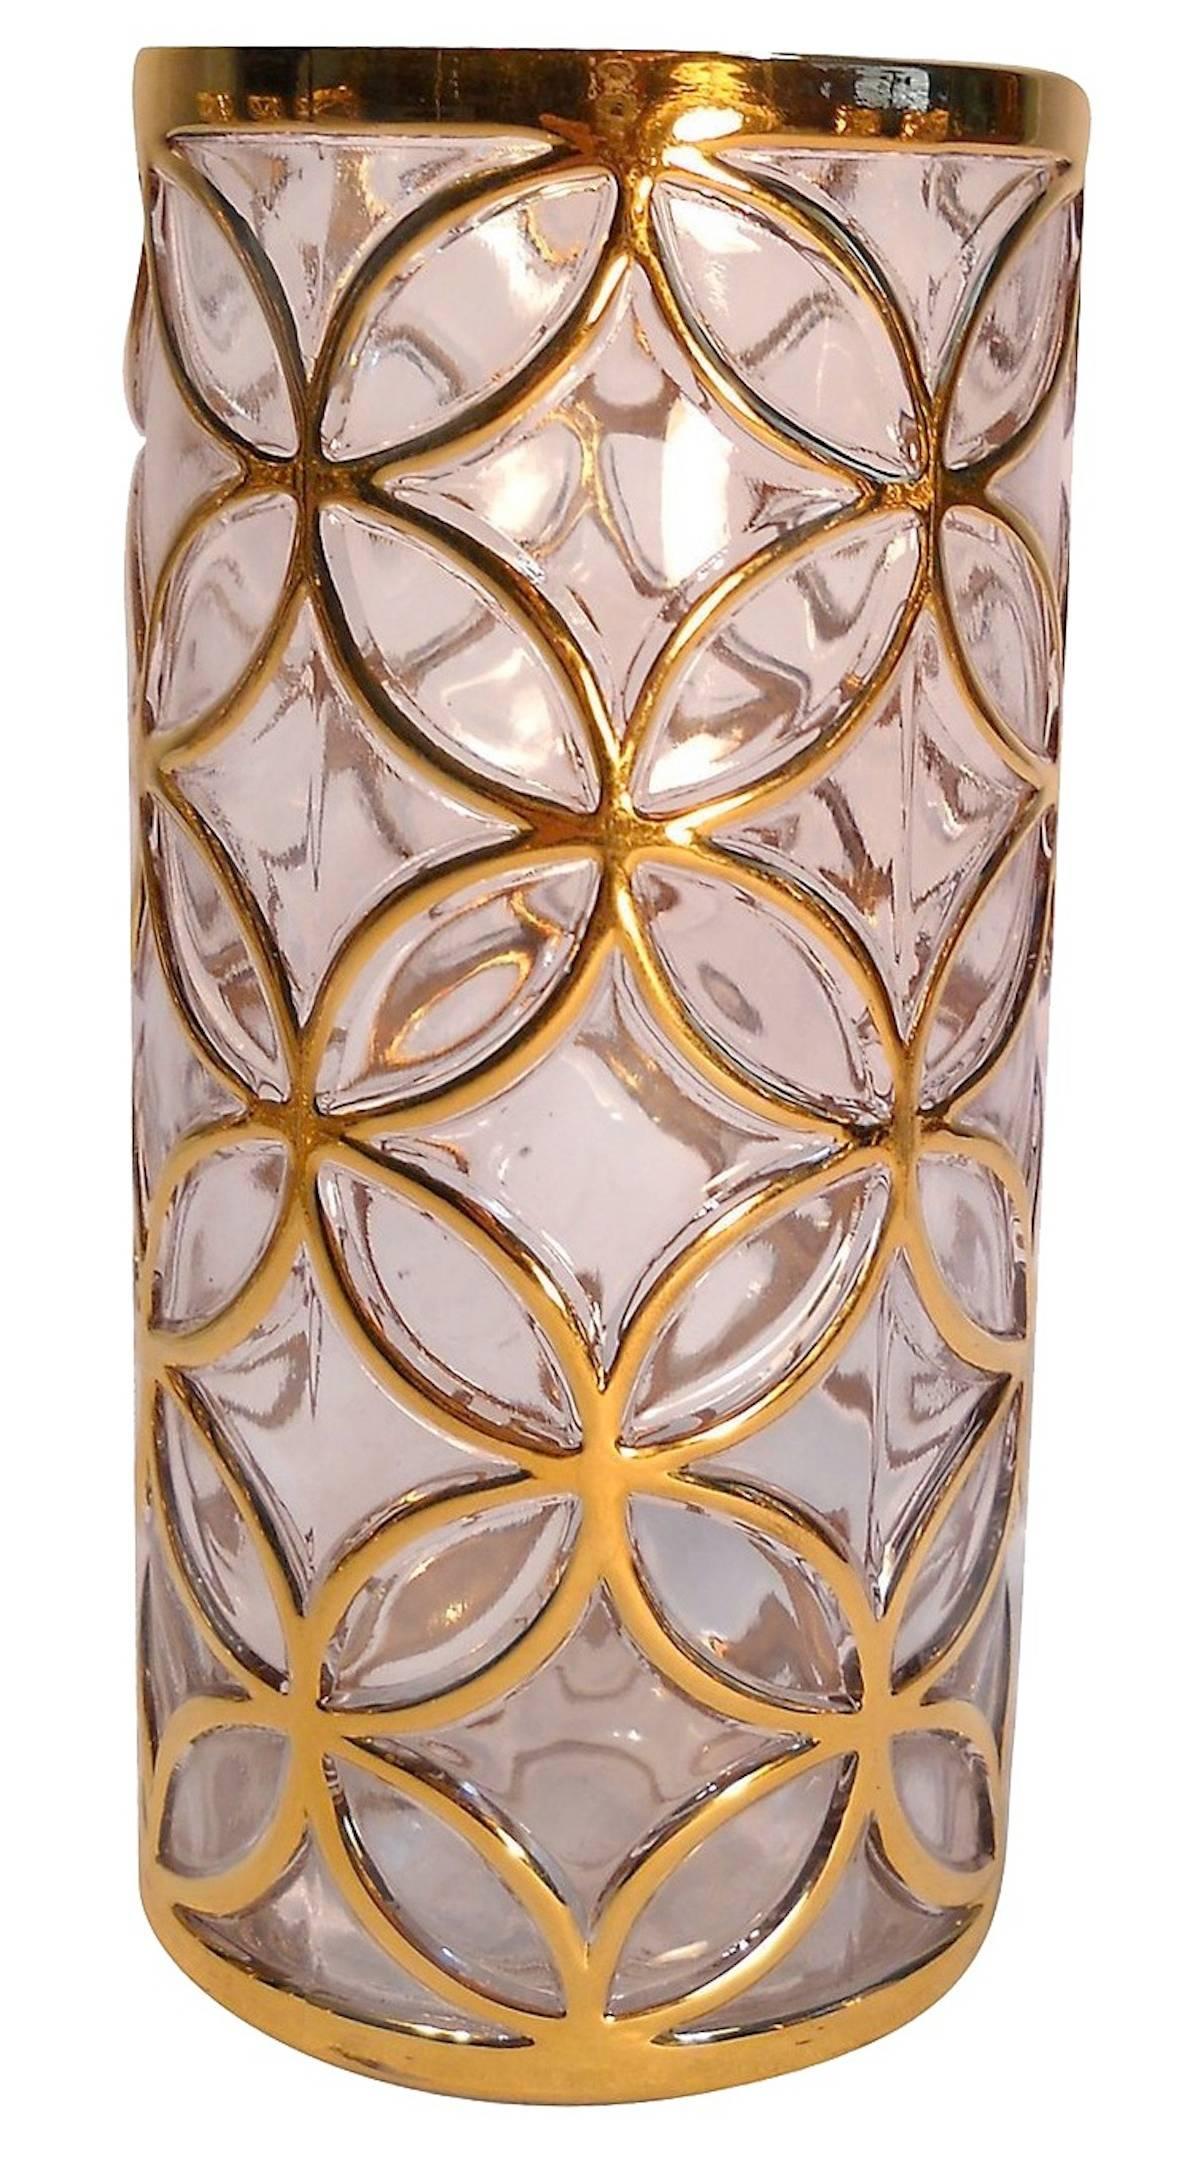 Set of six 1960s imperial glass 'Tablique Sortijas de Oro' collection gold highball glasses. Overall raised geometric design with 22-karat gold. Each glass stamped with IG imperial glass mark on the bottom.